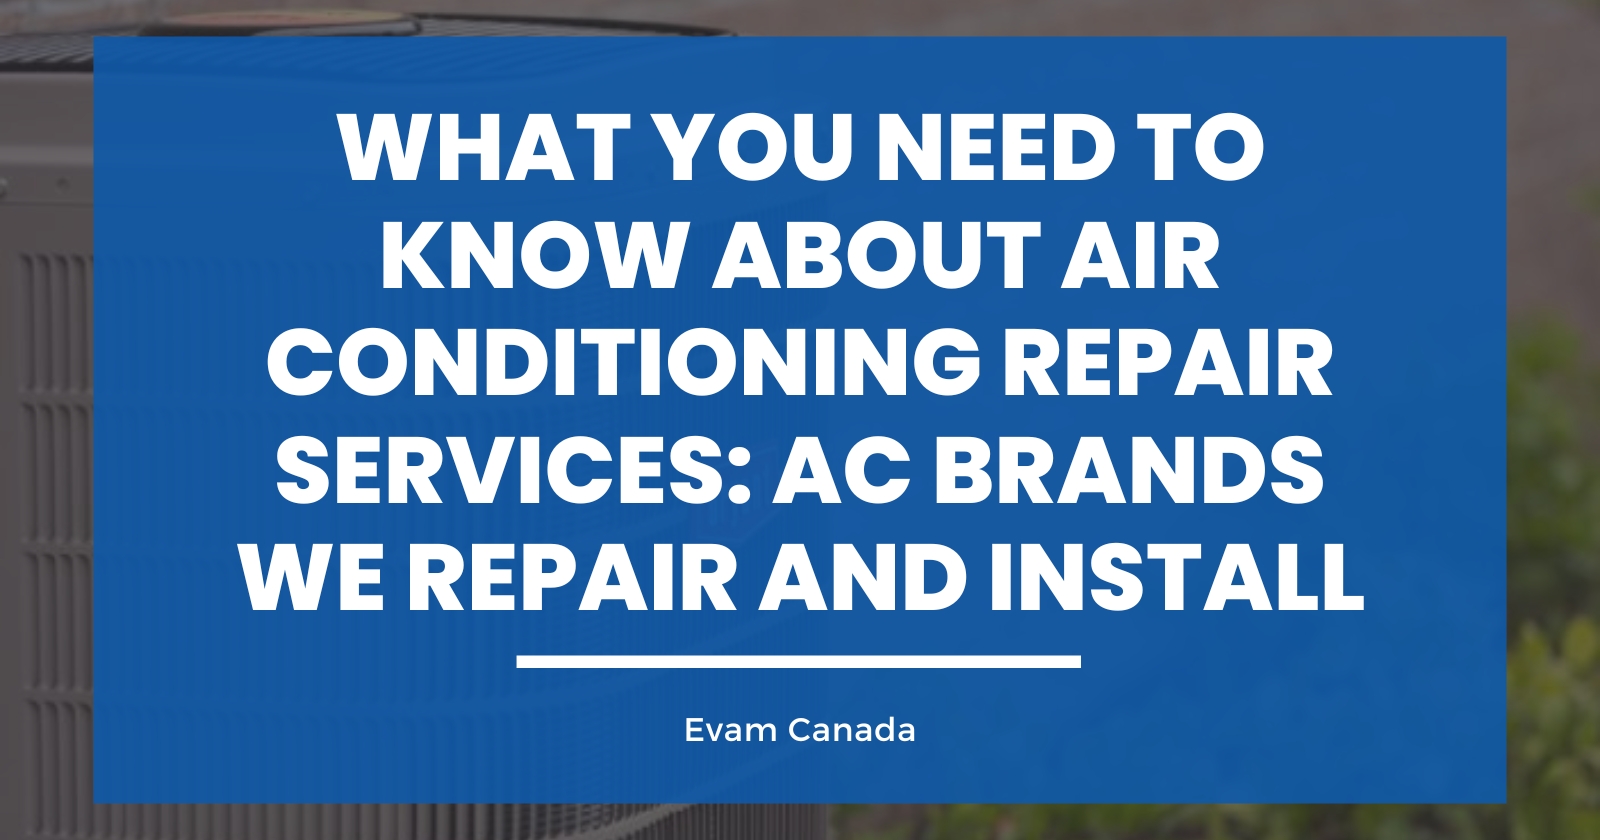 What You Need to Know About Air Conditioning Repair Services: AC Brands We Repair and Install